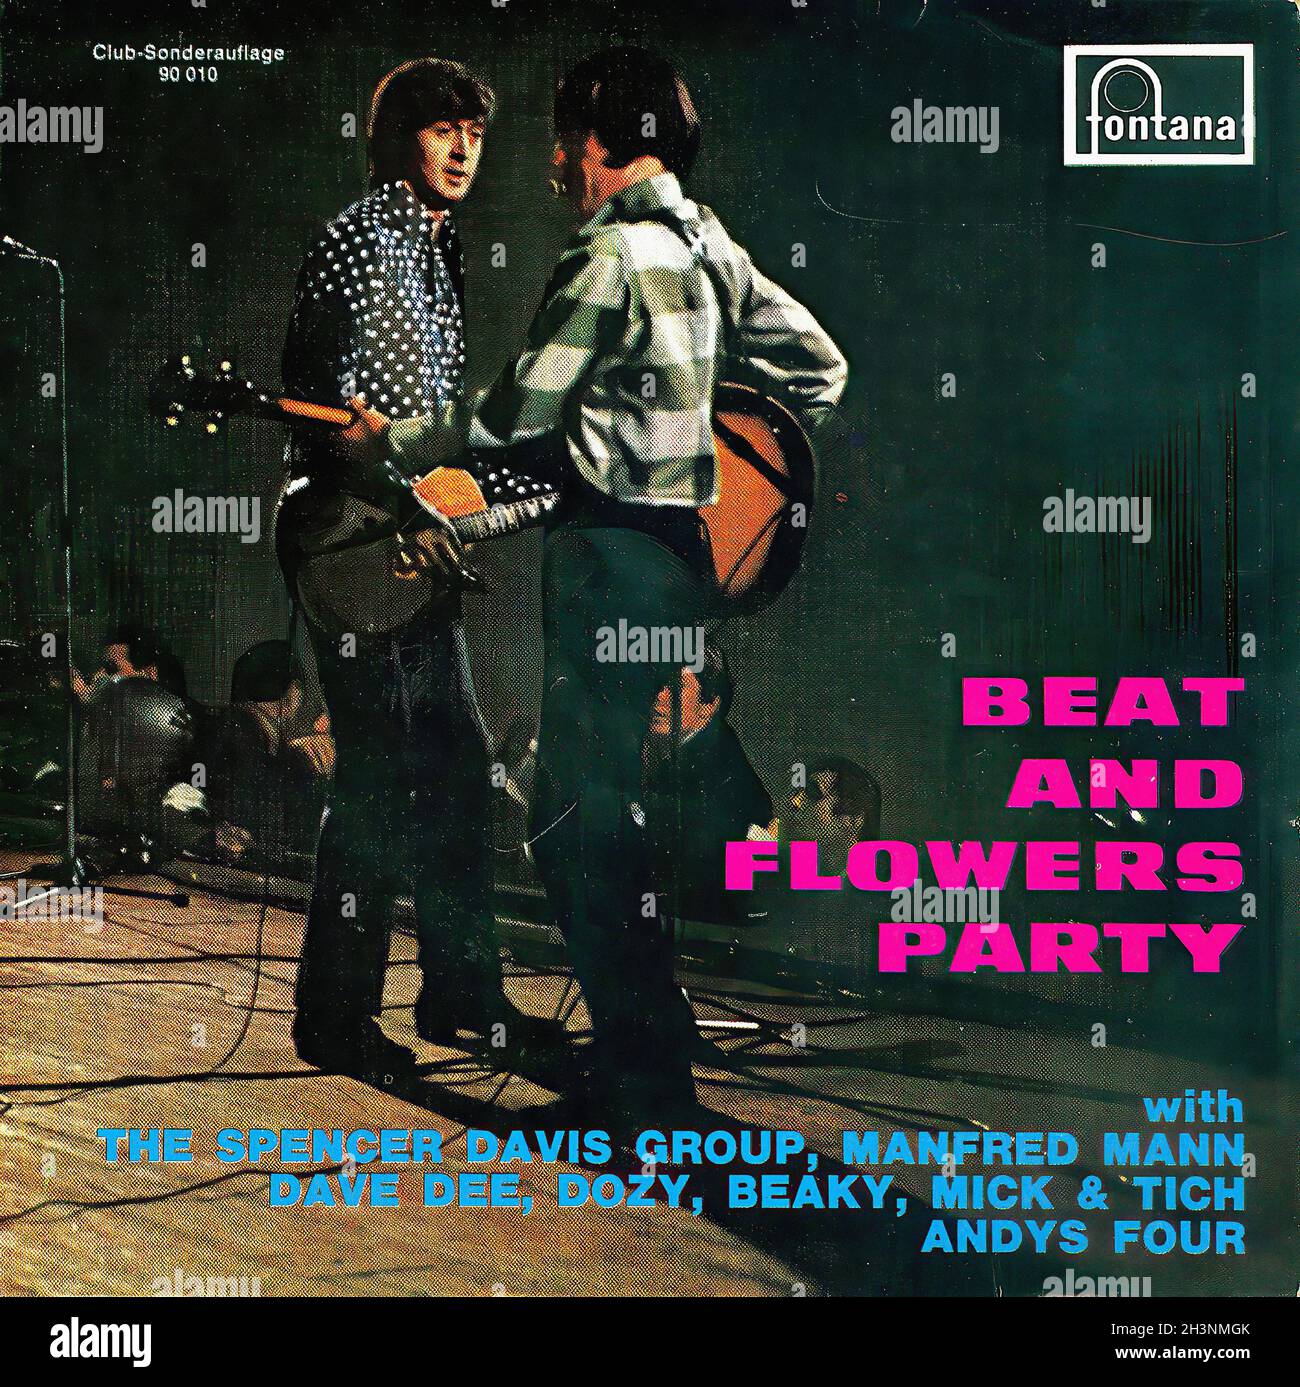 Vintage Vinyl Recording - Spencer Davis Group, The - Manfred Mann - Dave Dee, Dozy Beaky, Mick & Tich - Andy's Four - Beat And Flowers Party - Austria -  1967 Stock Photo